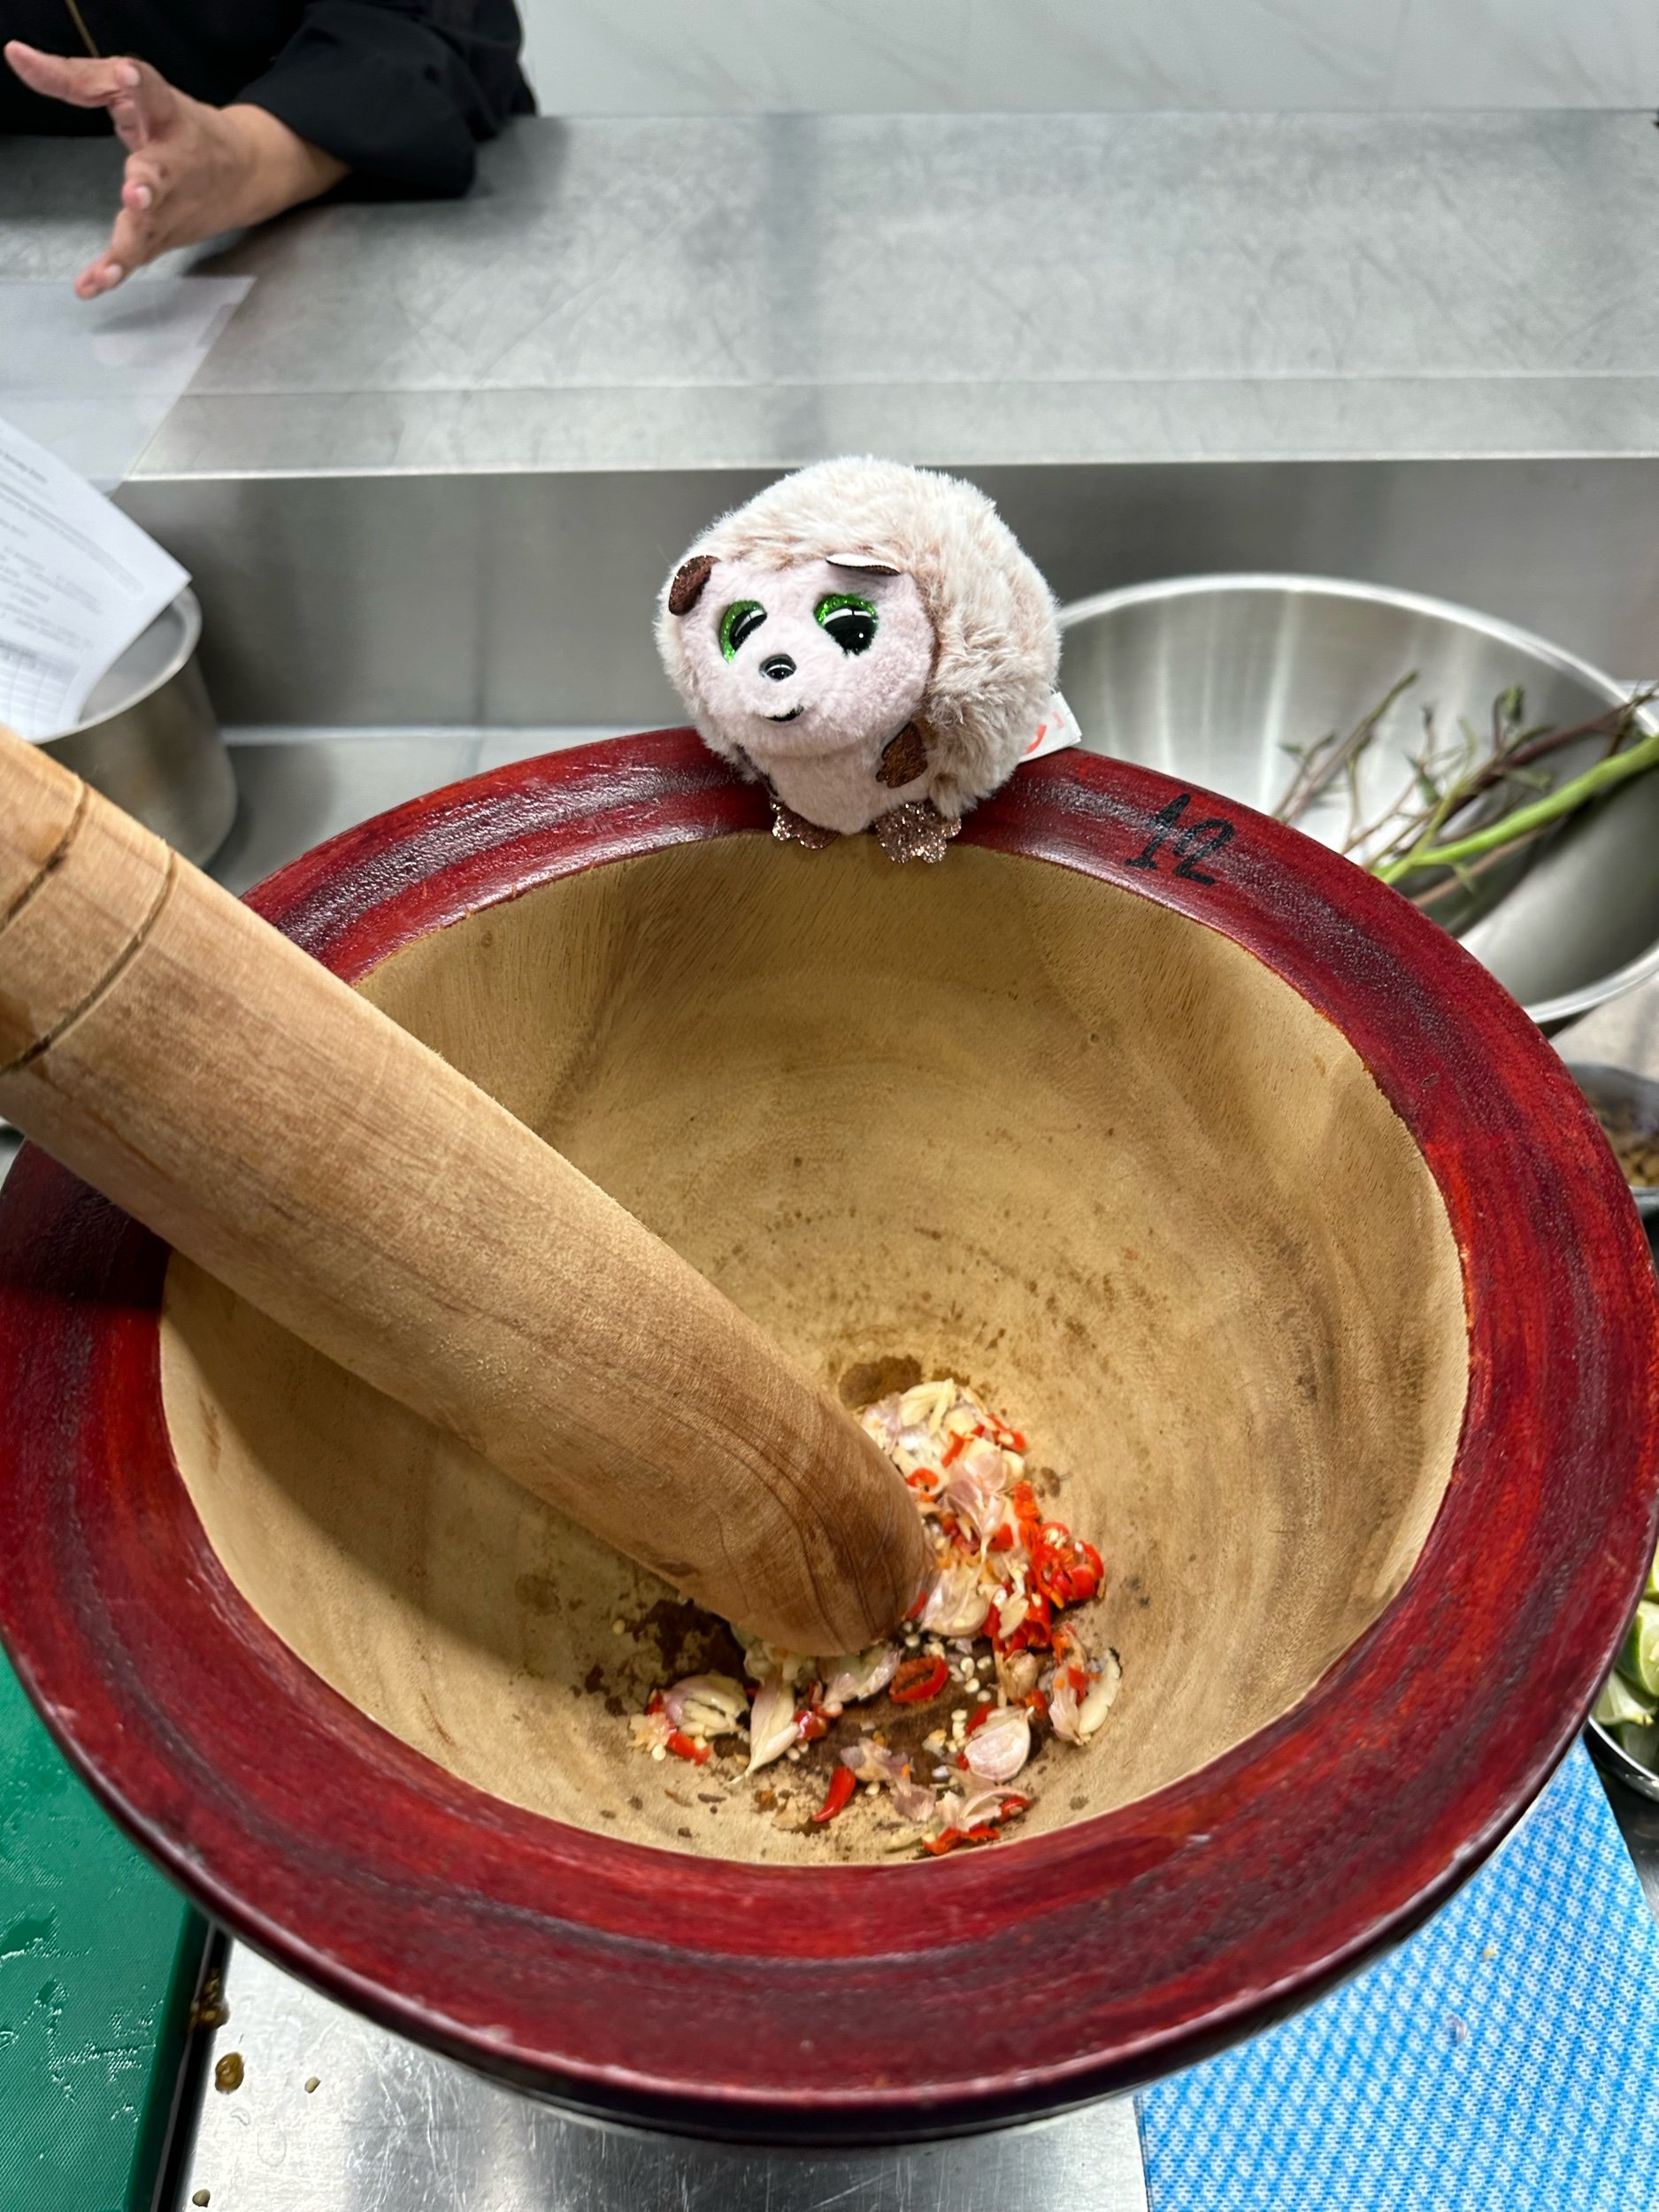 Hedgie supervising cooking classes